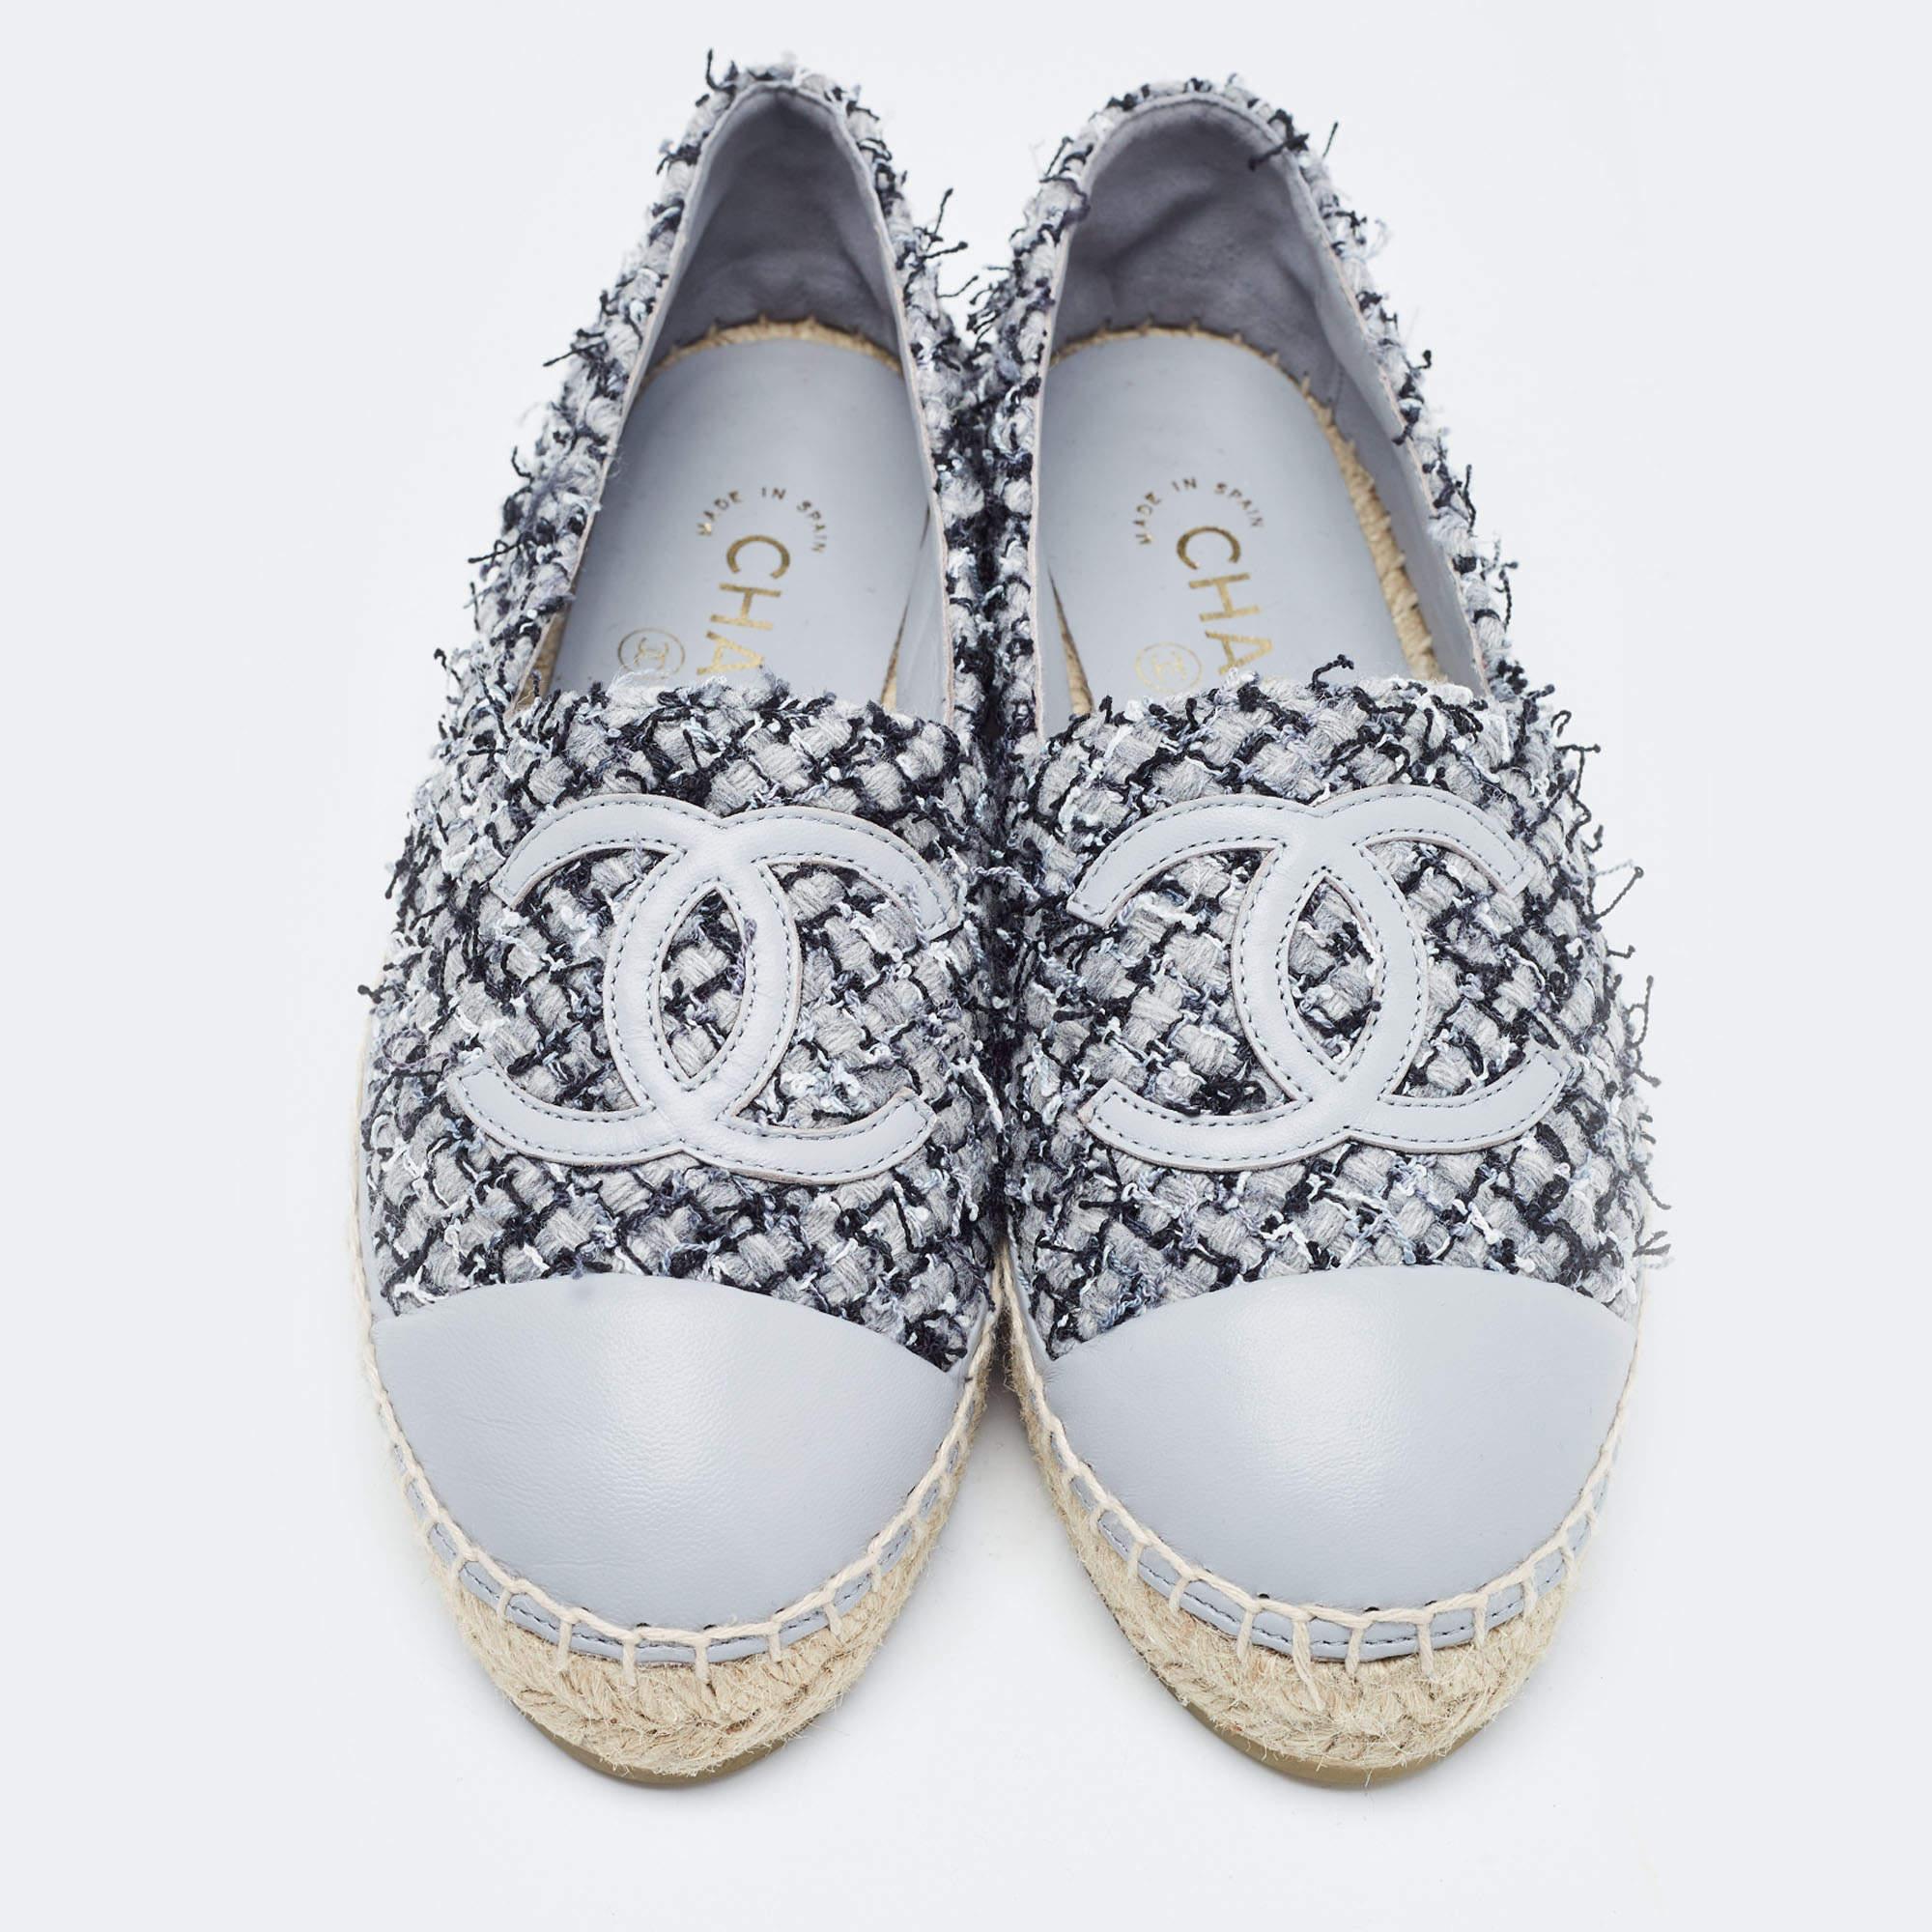 Chanel Grey Tweed and Leather Cap Toe CC Espadrille Flats Size 36 3